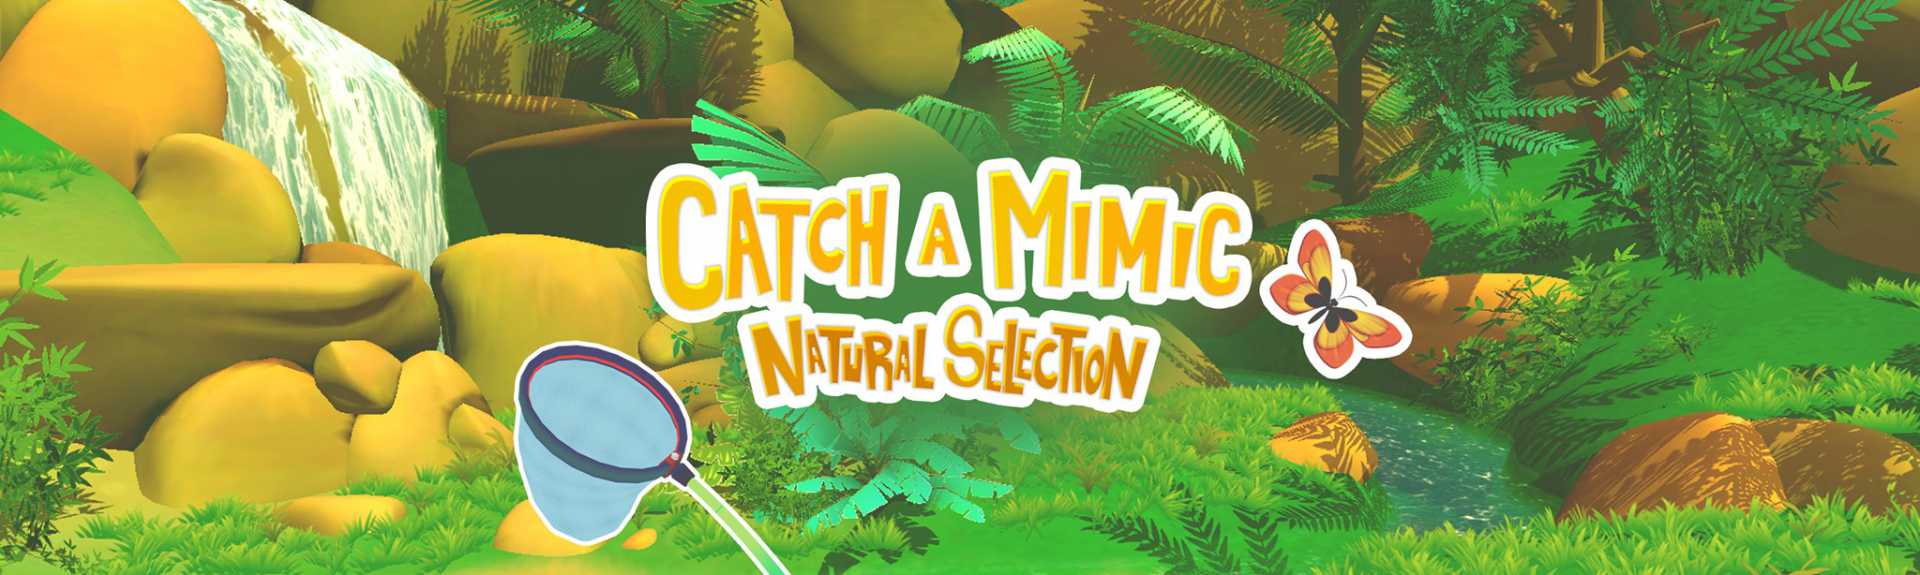 Catch a Mimic: Natural Selection